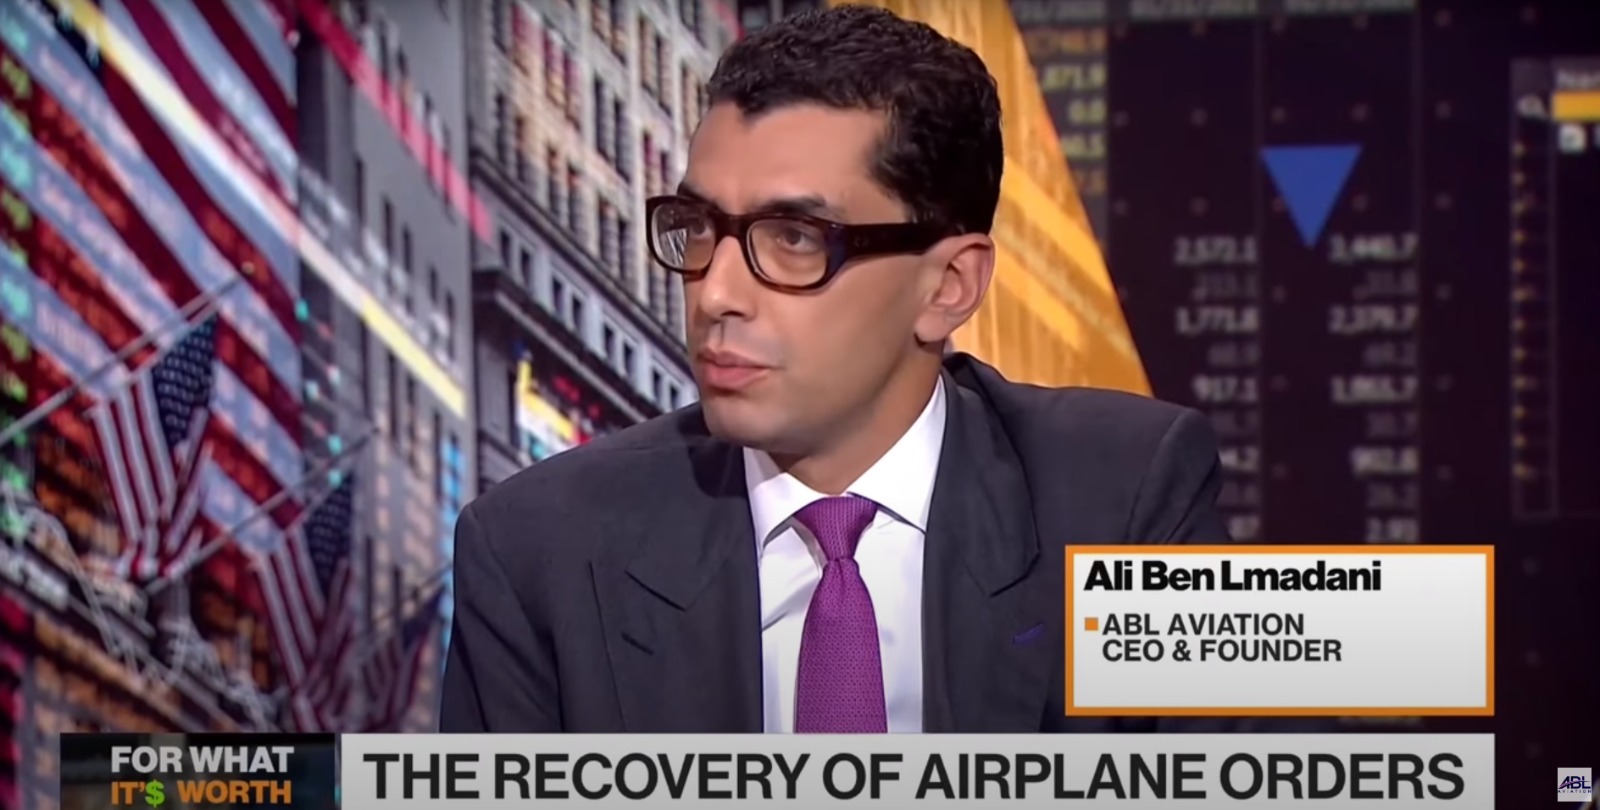 Bloomberg Markets: ABL Aviation’s CEO, Ali Ben Lmadani Discusses Aircraft Orders Recovery in 2023